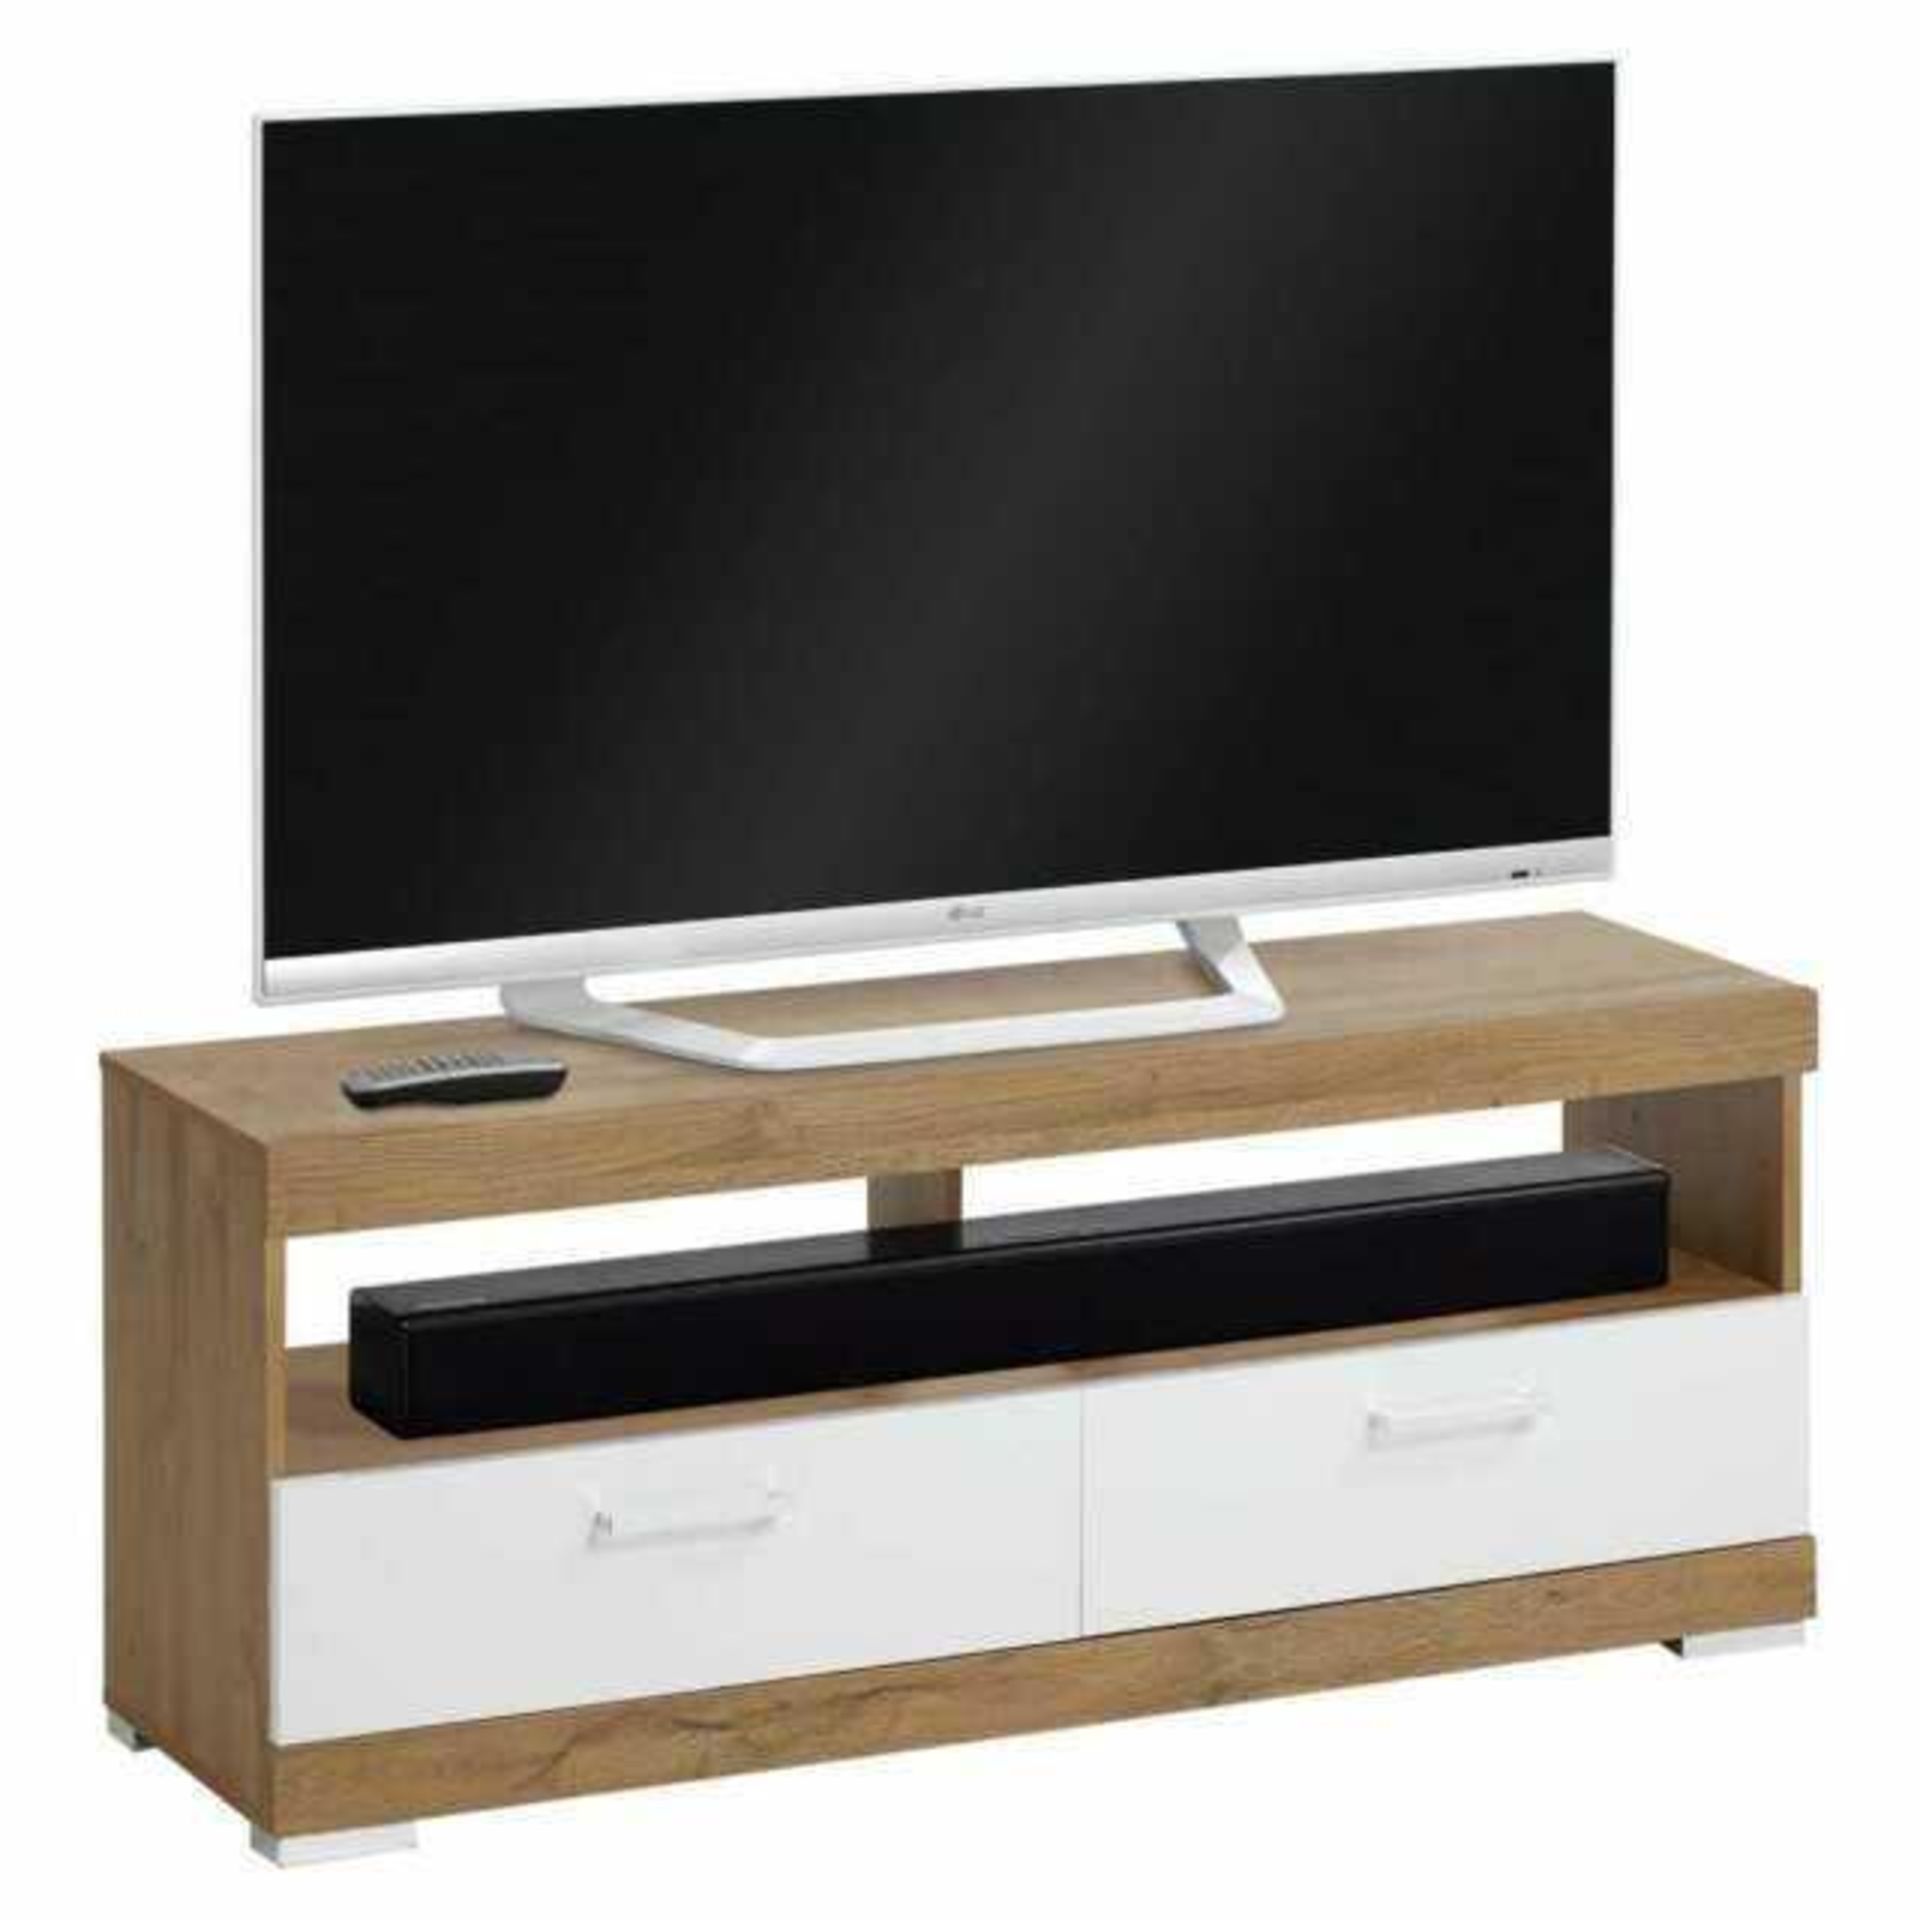 RRP £120. Boxed Holte Wooden Tv Stand